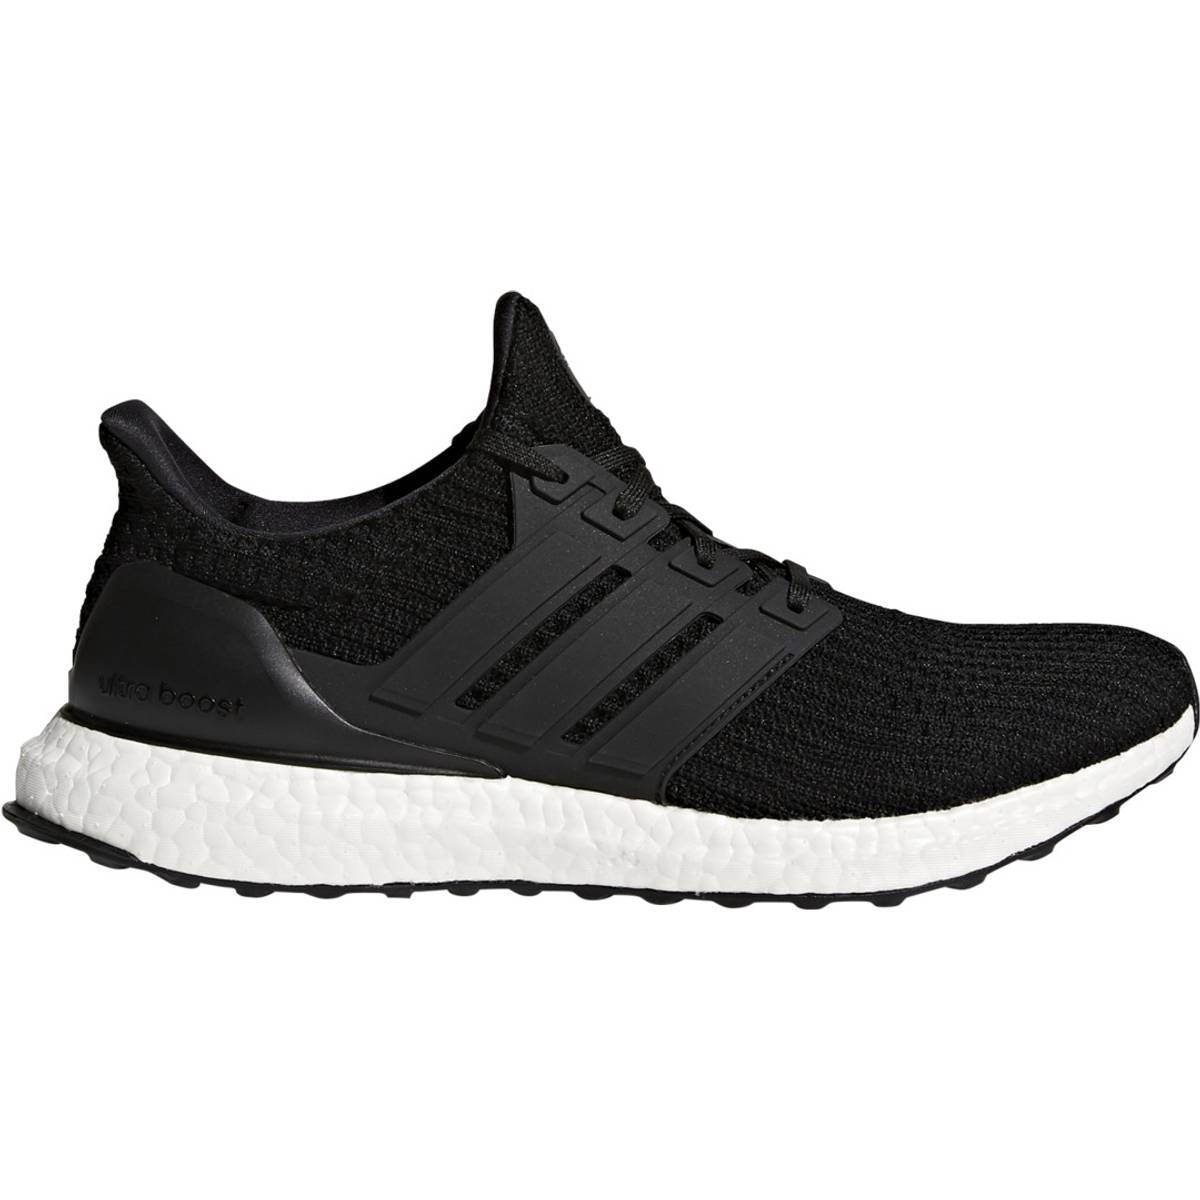 Free shipping > solar boost pricerunner > Up to 64% OFF >